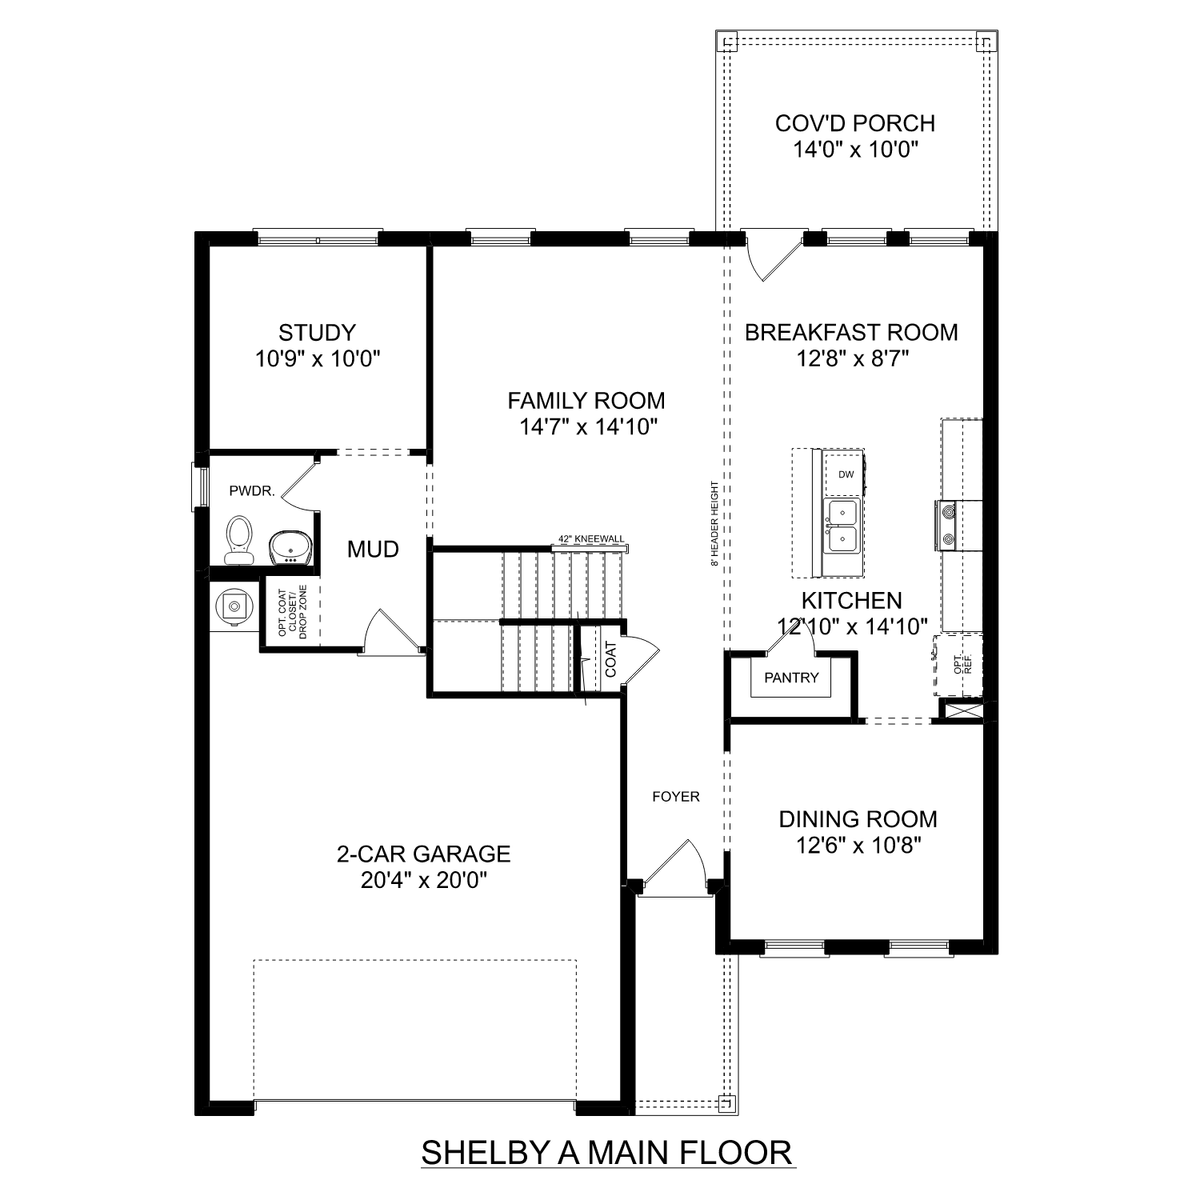 1 - The Shelby A buildable floor plan layout in Davidson Homes' Little Burwell Estates community.